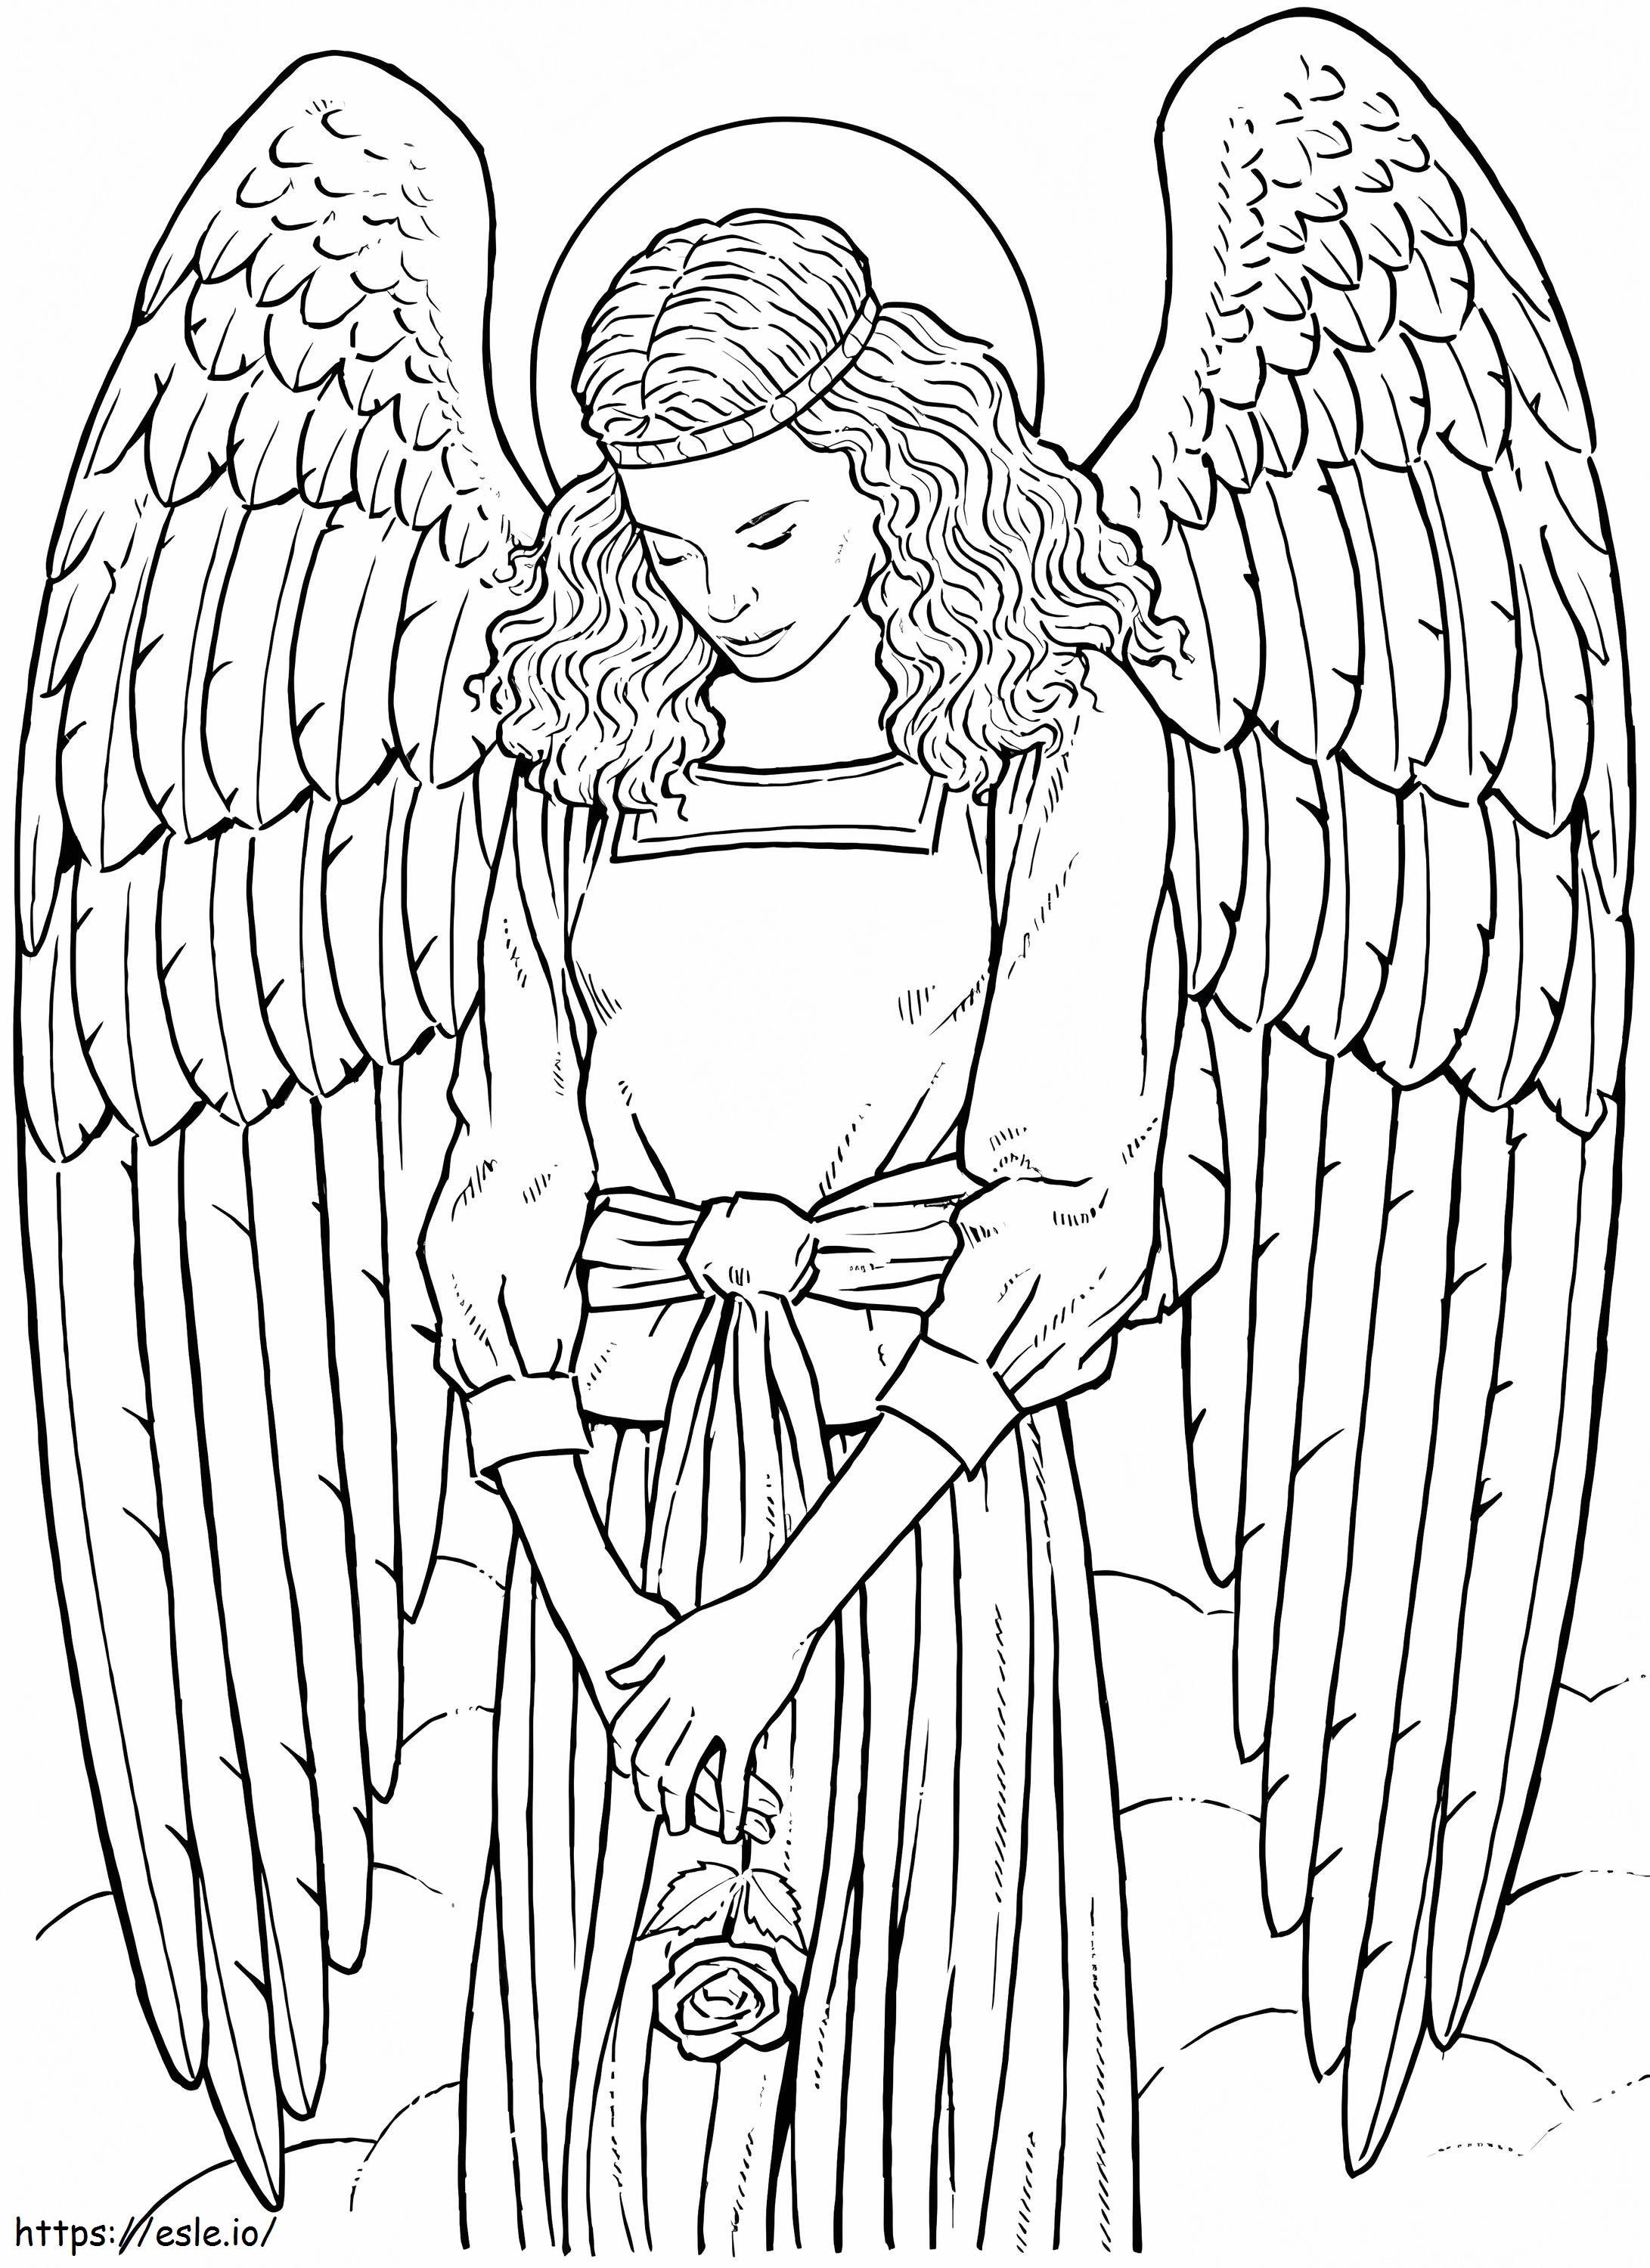 Awesome Angel coloring page